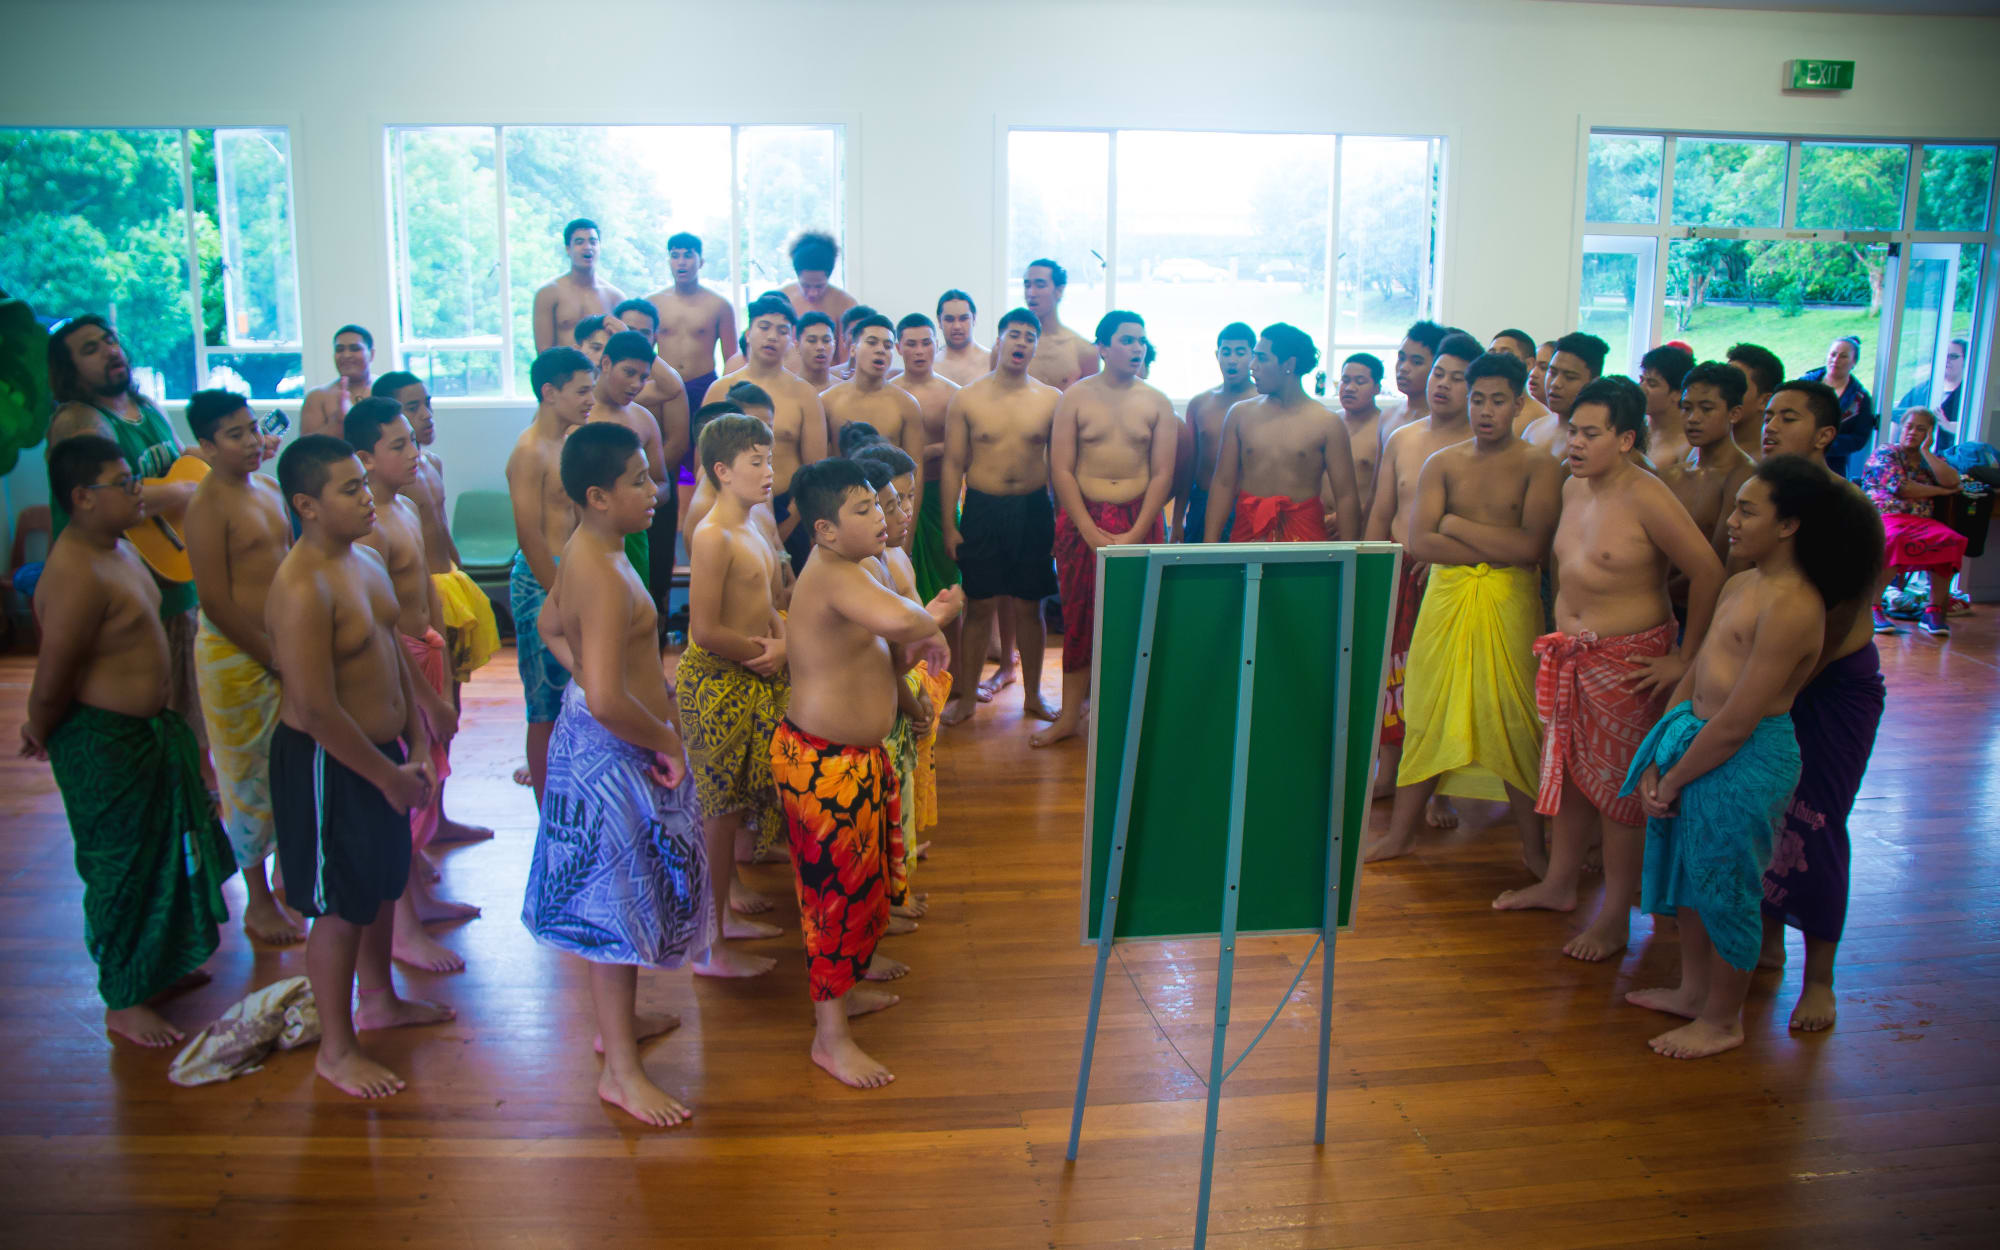 St Paul's Samoan group learn the Pese o le Aso section in one of their first Polyfest practices.